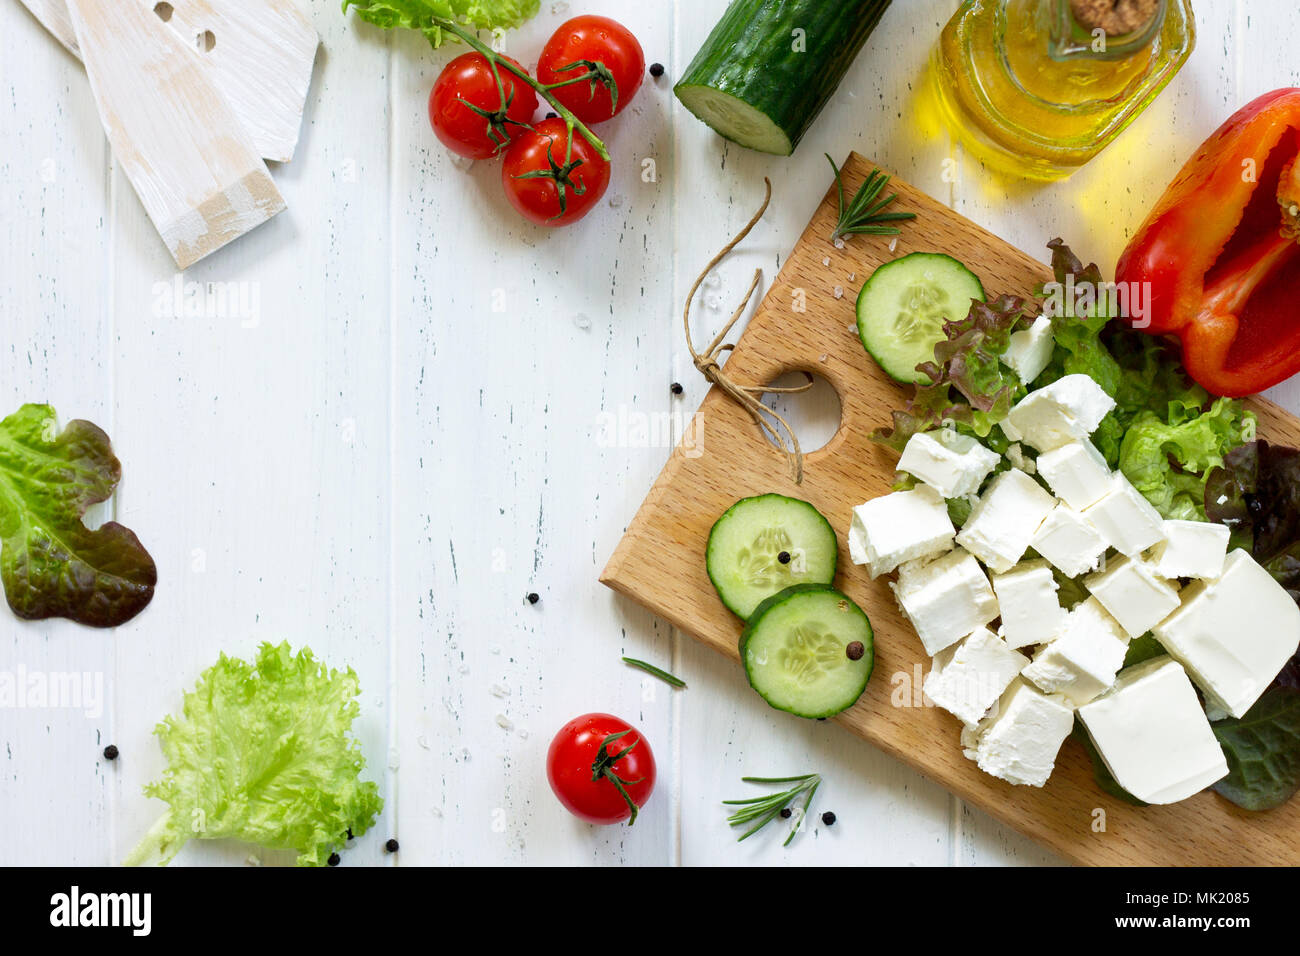 Feta cheese and black olives, cooking qreek salad with fresh vegetables on a white wooden table. Stock Photo